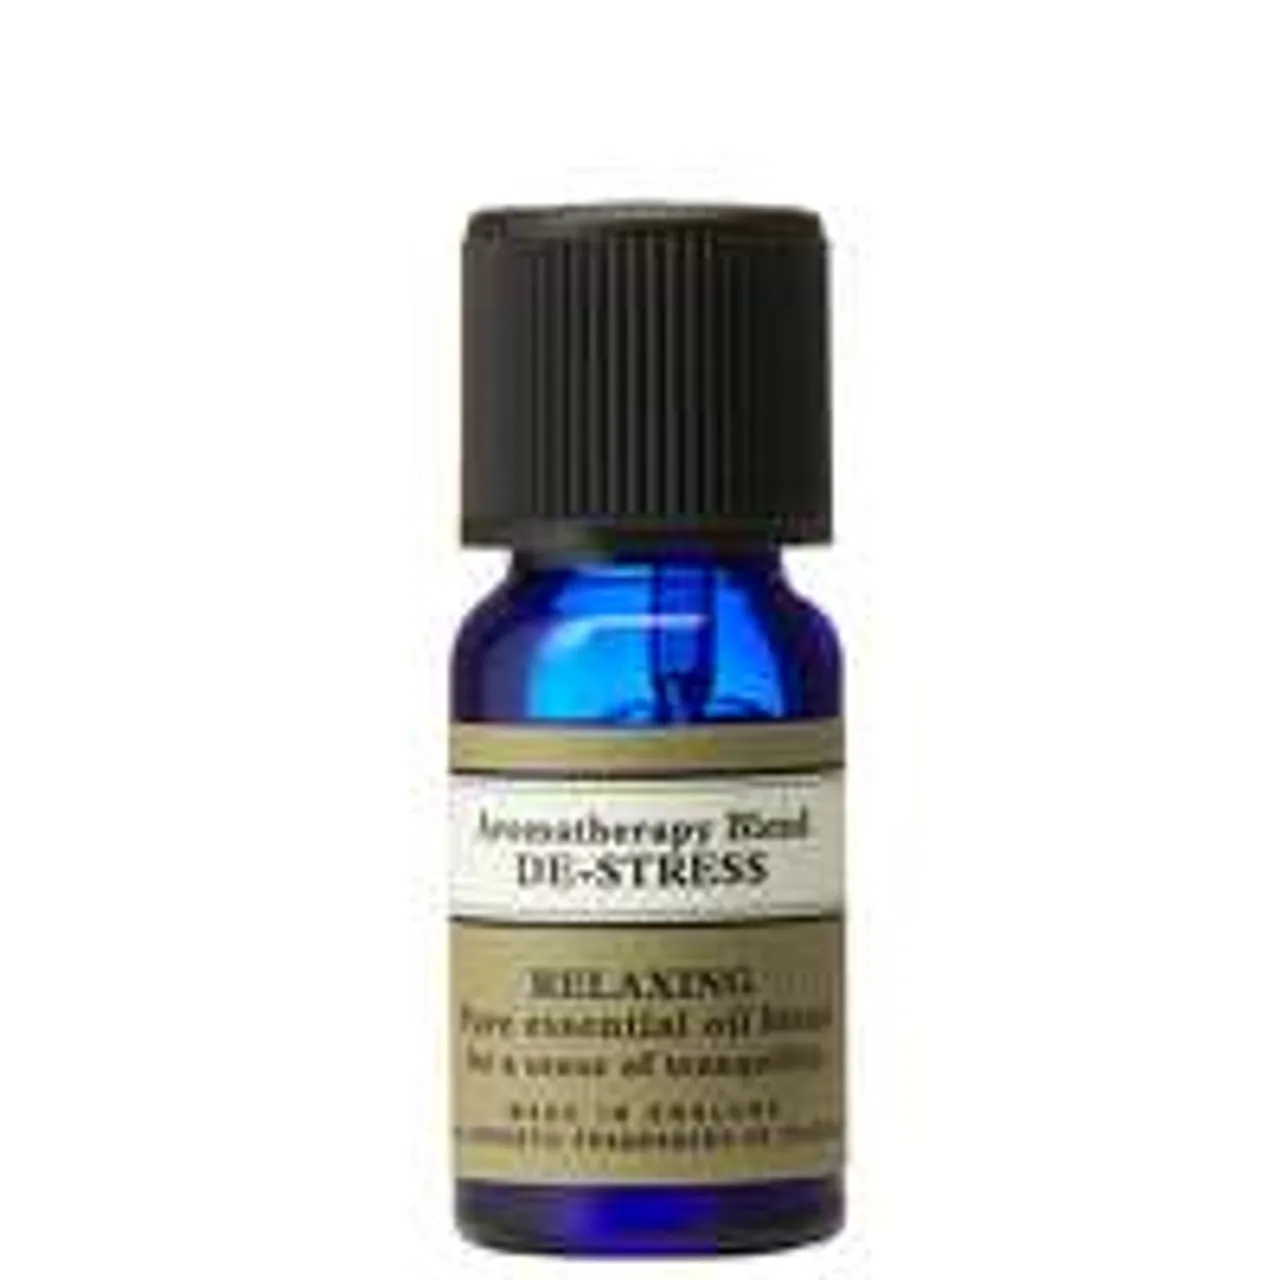 Neal's Yard Remedies Aromatherapy and Diffusers Aromatherapy Blend - De Stress 10ml